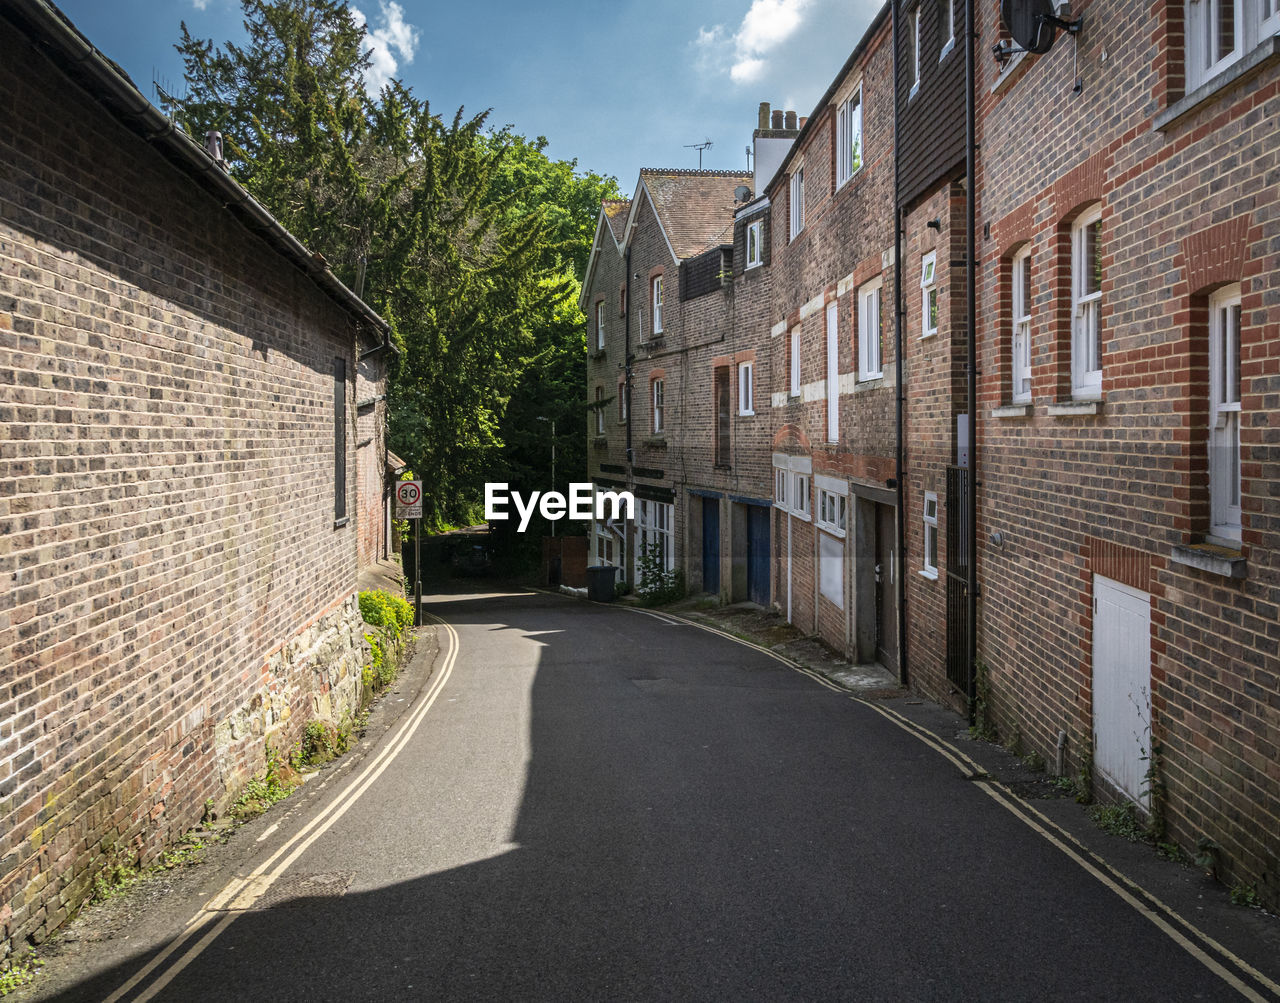 Street view of hermitage lane in the town of east grinstead, west sussex, uk